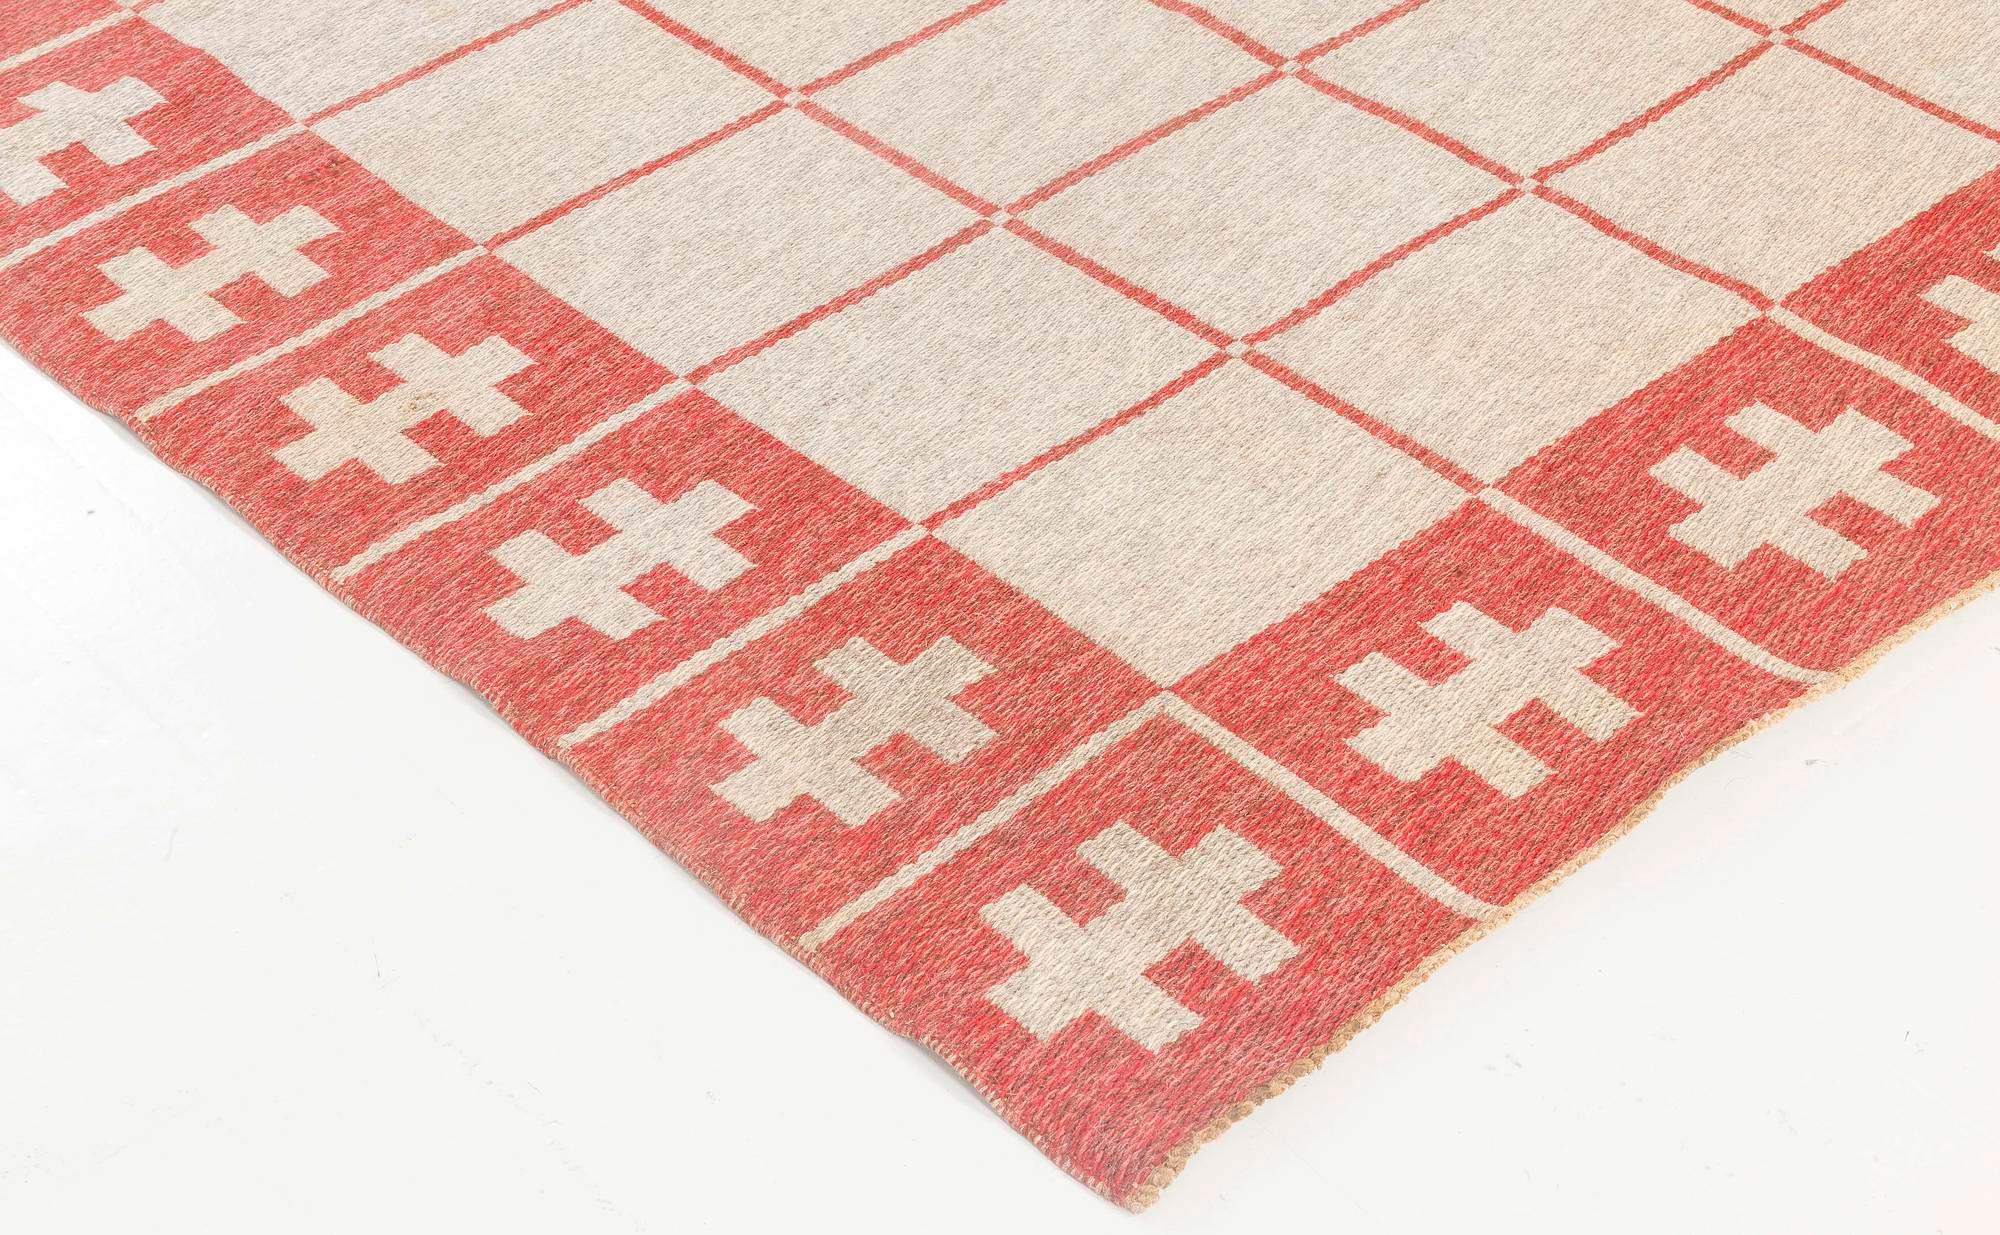 Mid-20th Century Swedish Flat-Weave Wool Rug In Good Condition For Sale In New York, NY